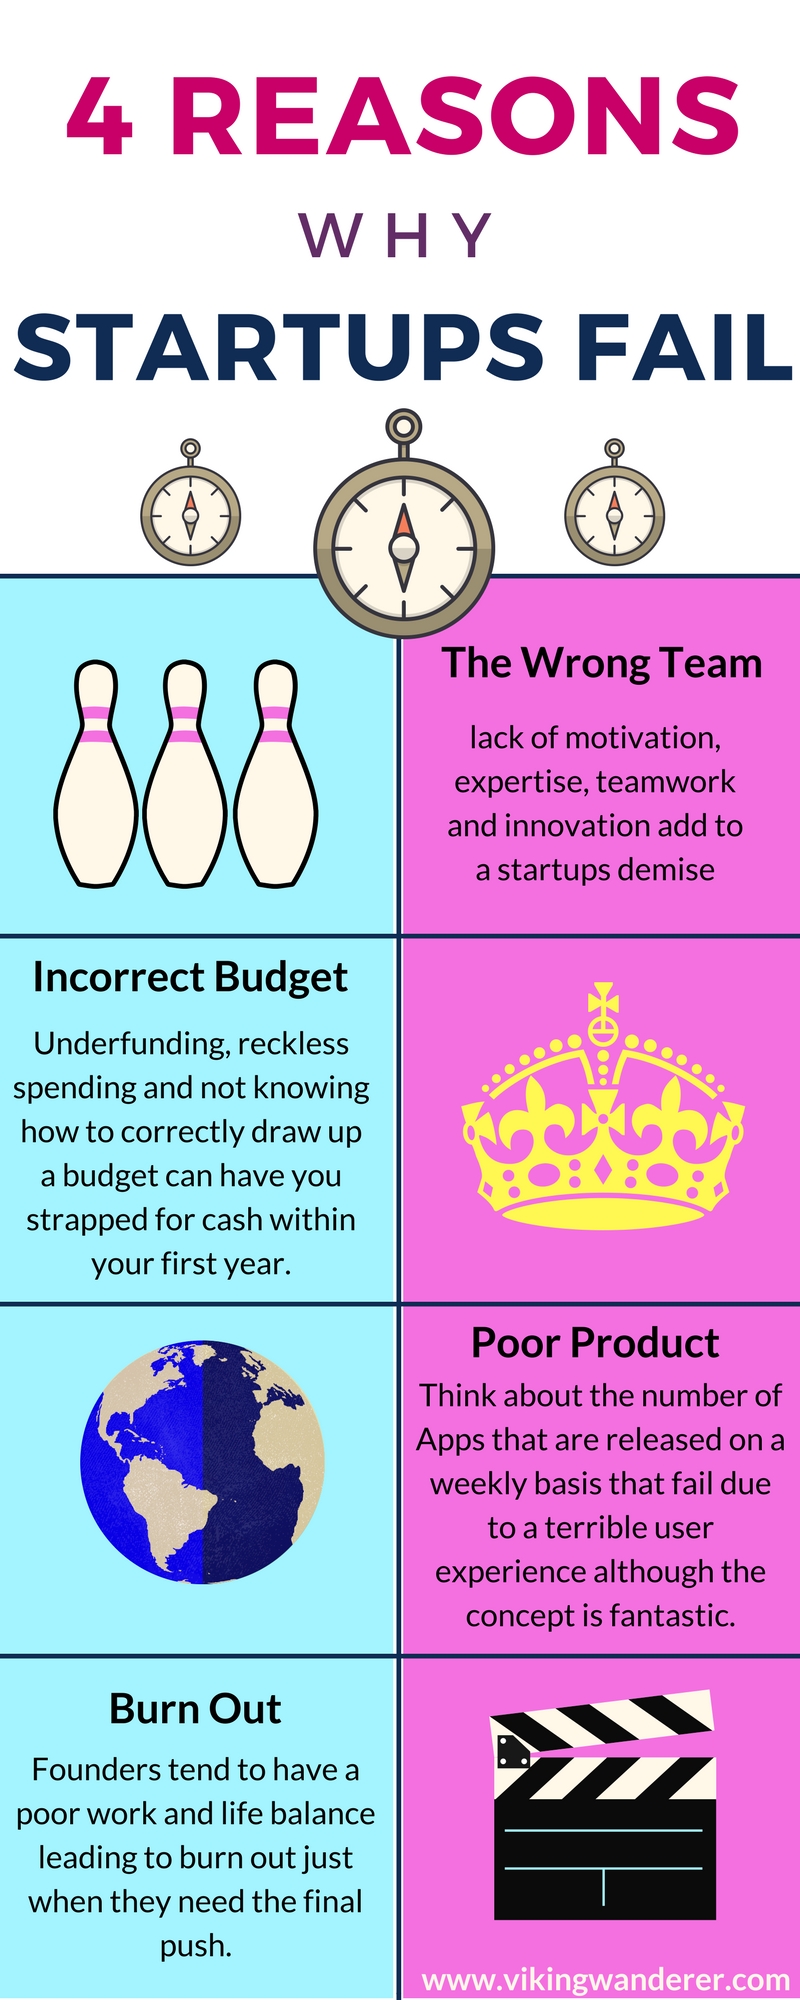 4 Reasons Why Startups Fail - Infographic - 800 x 2000 jpeg 687kB